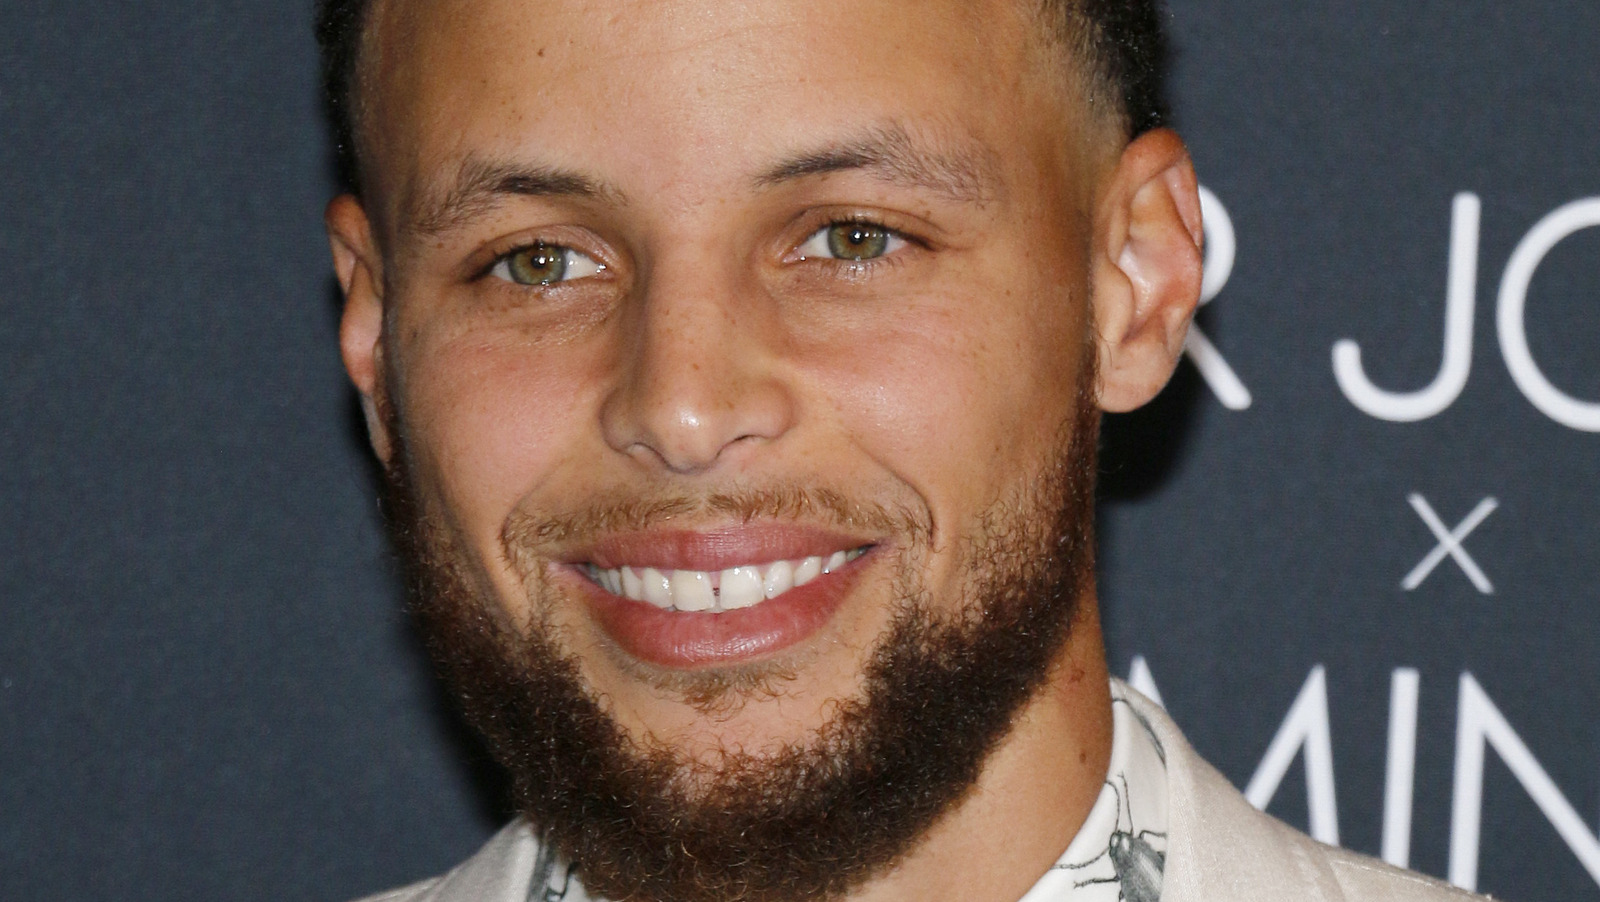 Steph Curry's mom Sonya Curry has filed to divorce husband Dell